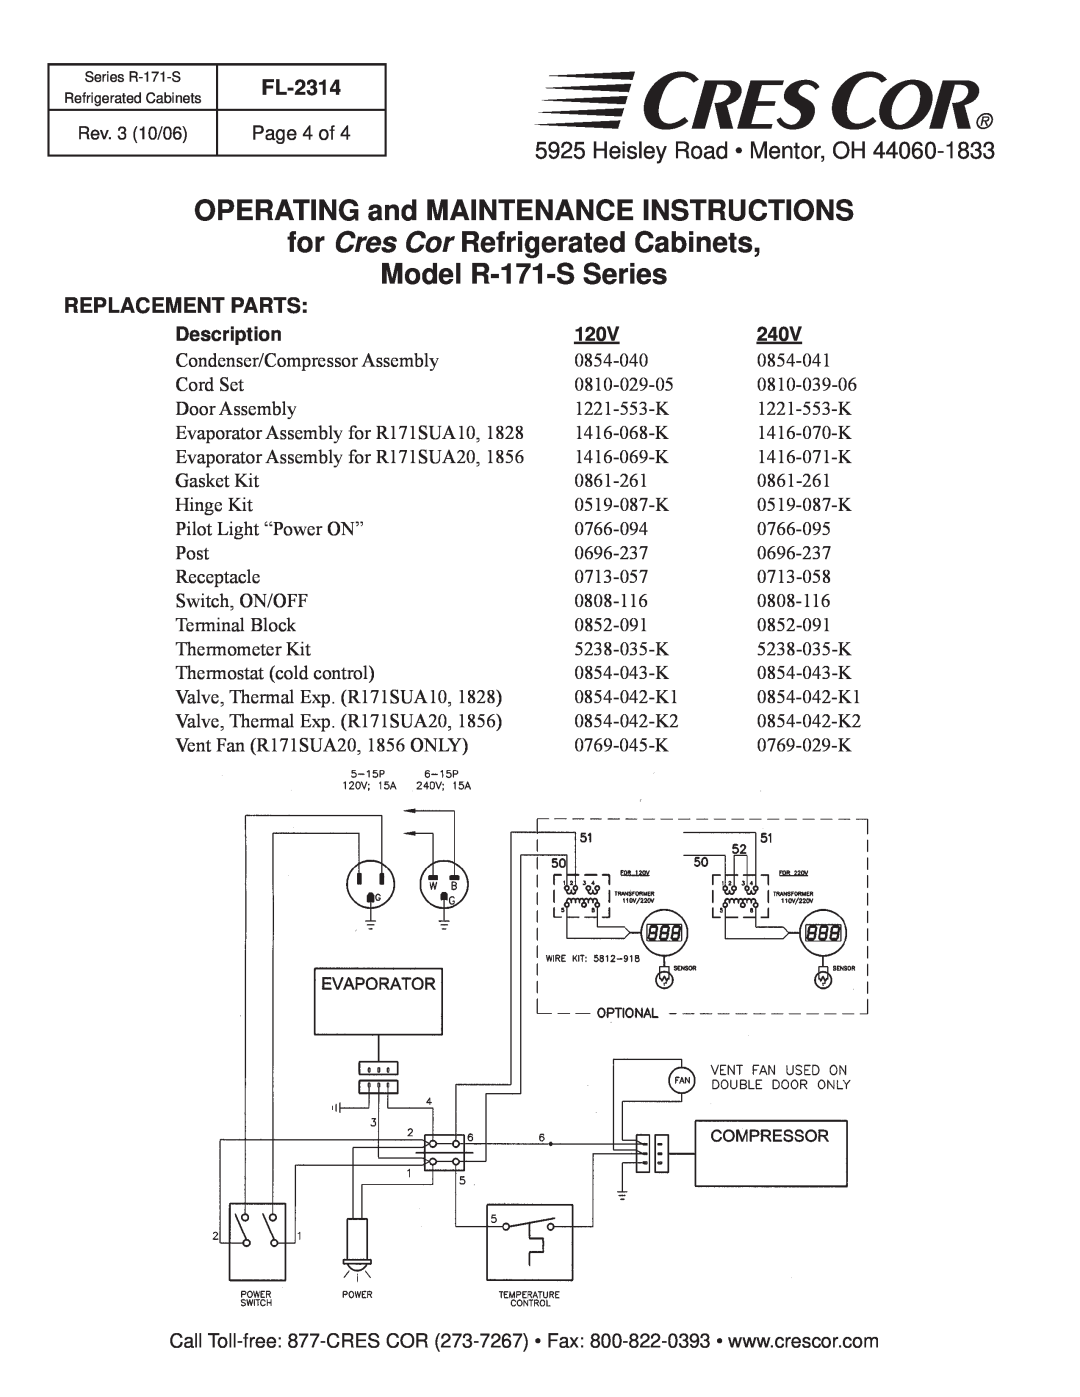 Cres Cor R171S1856 OPERATING and MAINTENANCE INSTRUCTIONS, for Cres Cor Refrigerated Cabinets, Model R-171-SSeries, 120V 